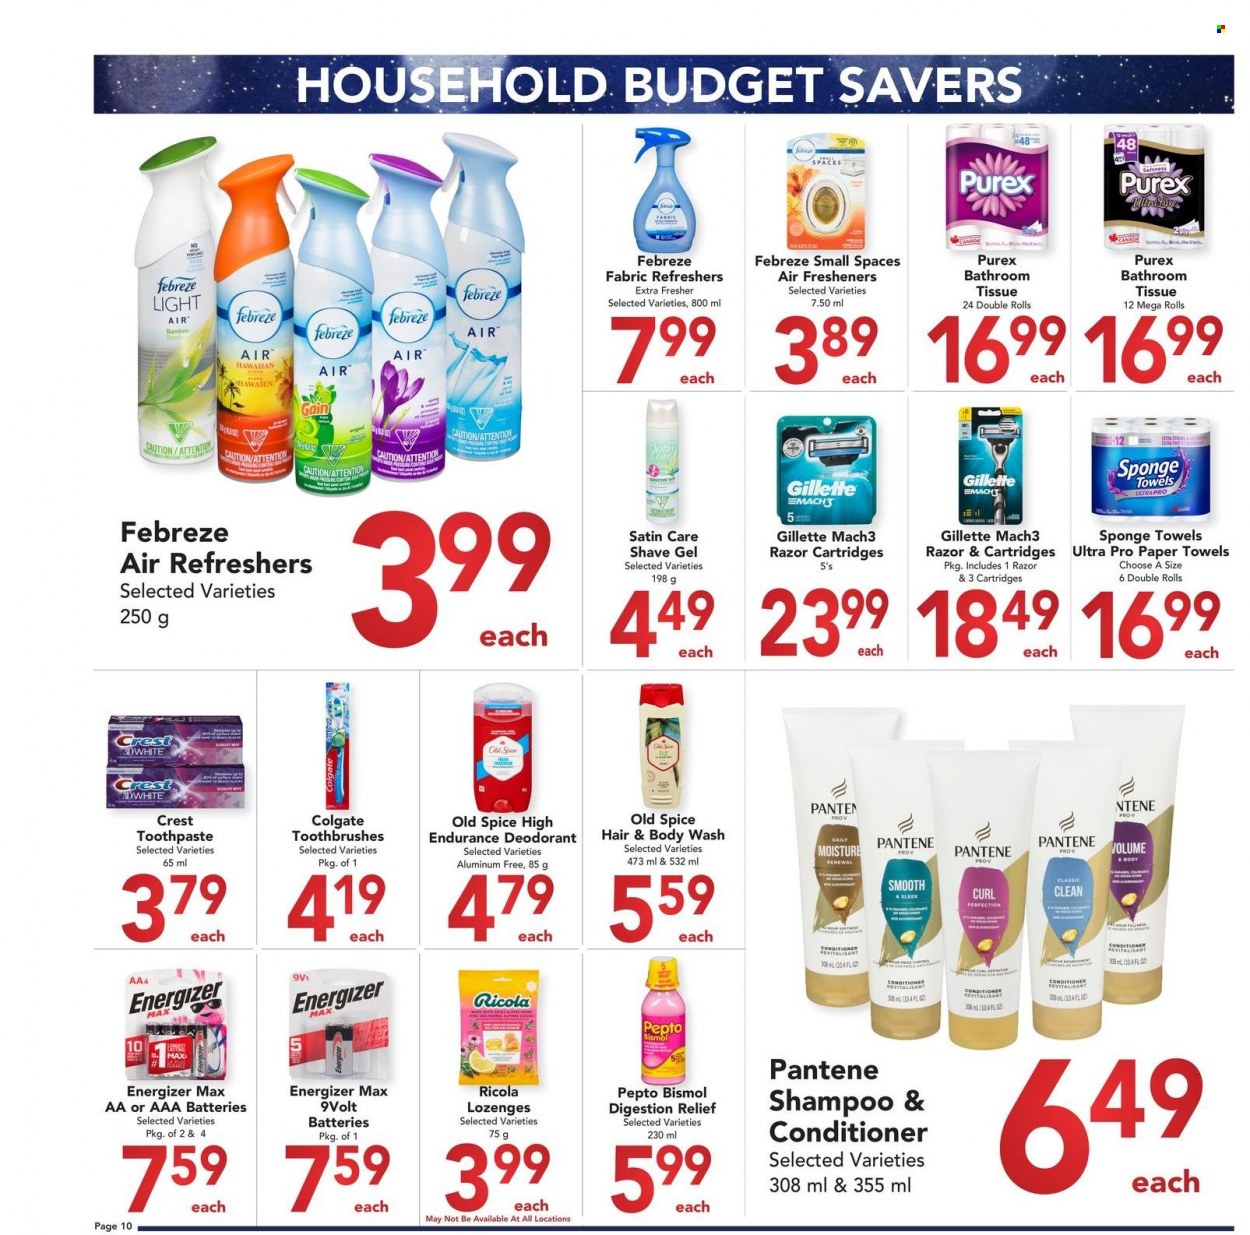 Buy-Low Foods Flyer - November 20, 2022 - December 31, 2022 - Sales products - ricola, spice, bath tissue, kitchen towels, paper towels, Febreze, Gain, Purex, body wash, hair & body wash, toothpaste, Crest, Gillette, conditioner, anti-perspirant, shave gel, Energizer, Colgate, shampoo, Pantene, Old Spice, deodorant. Page 10.